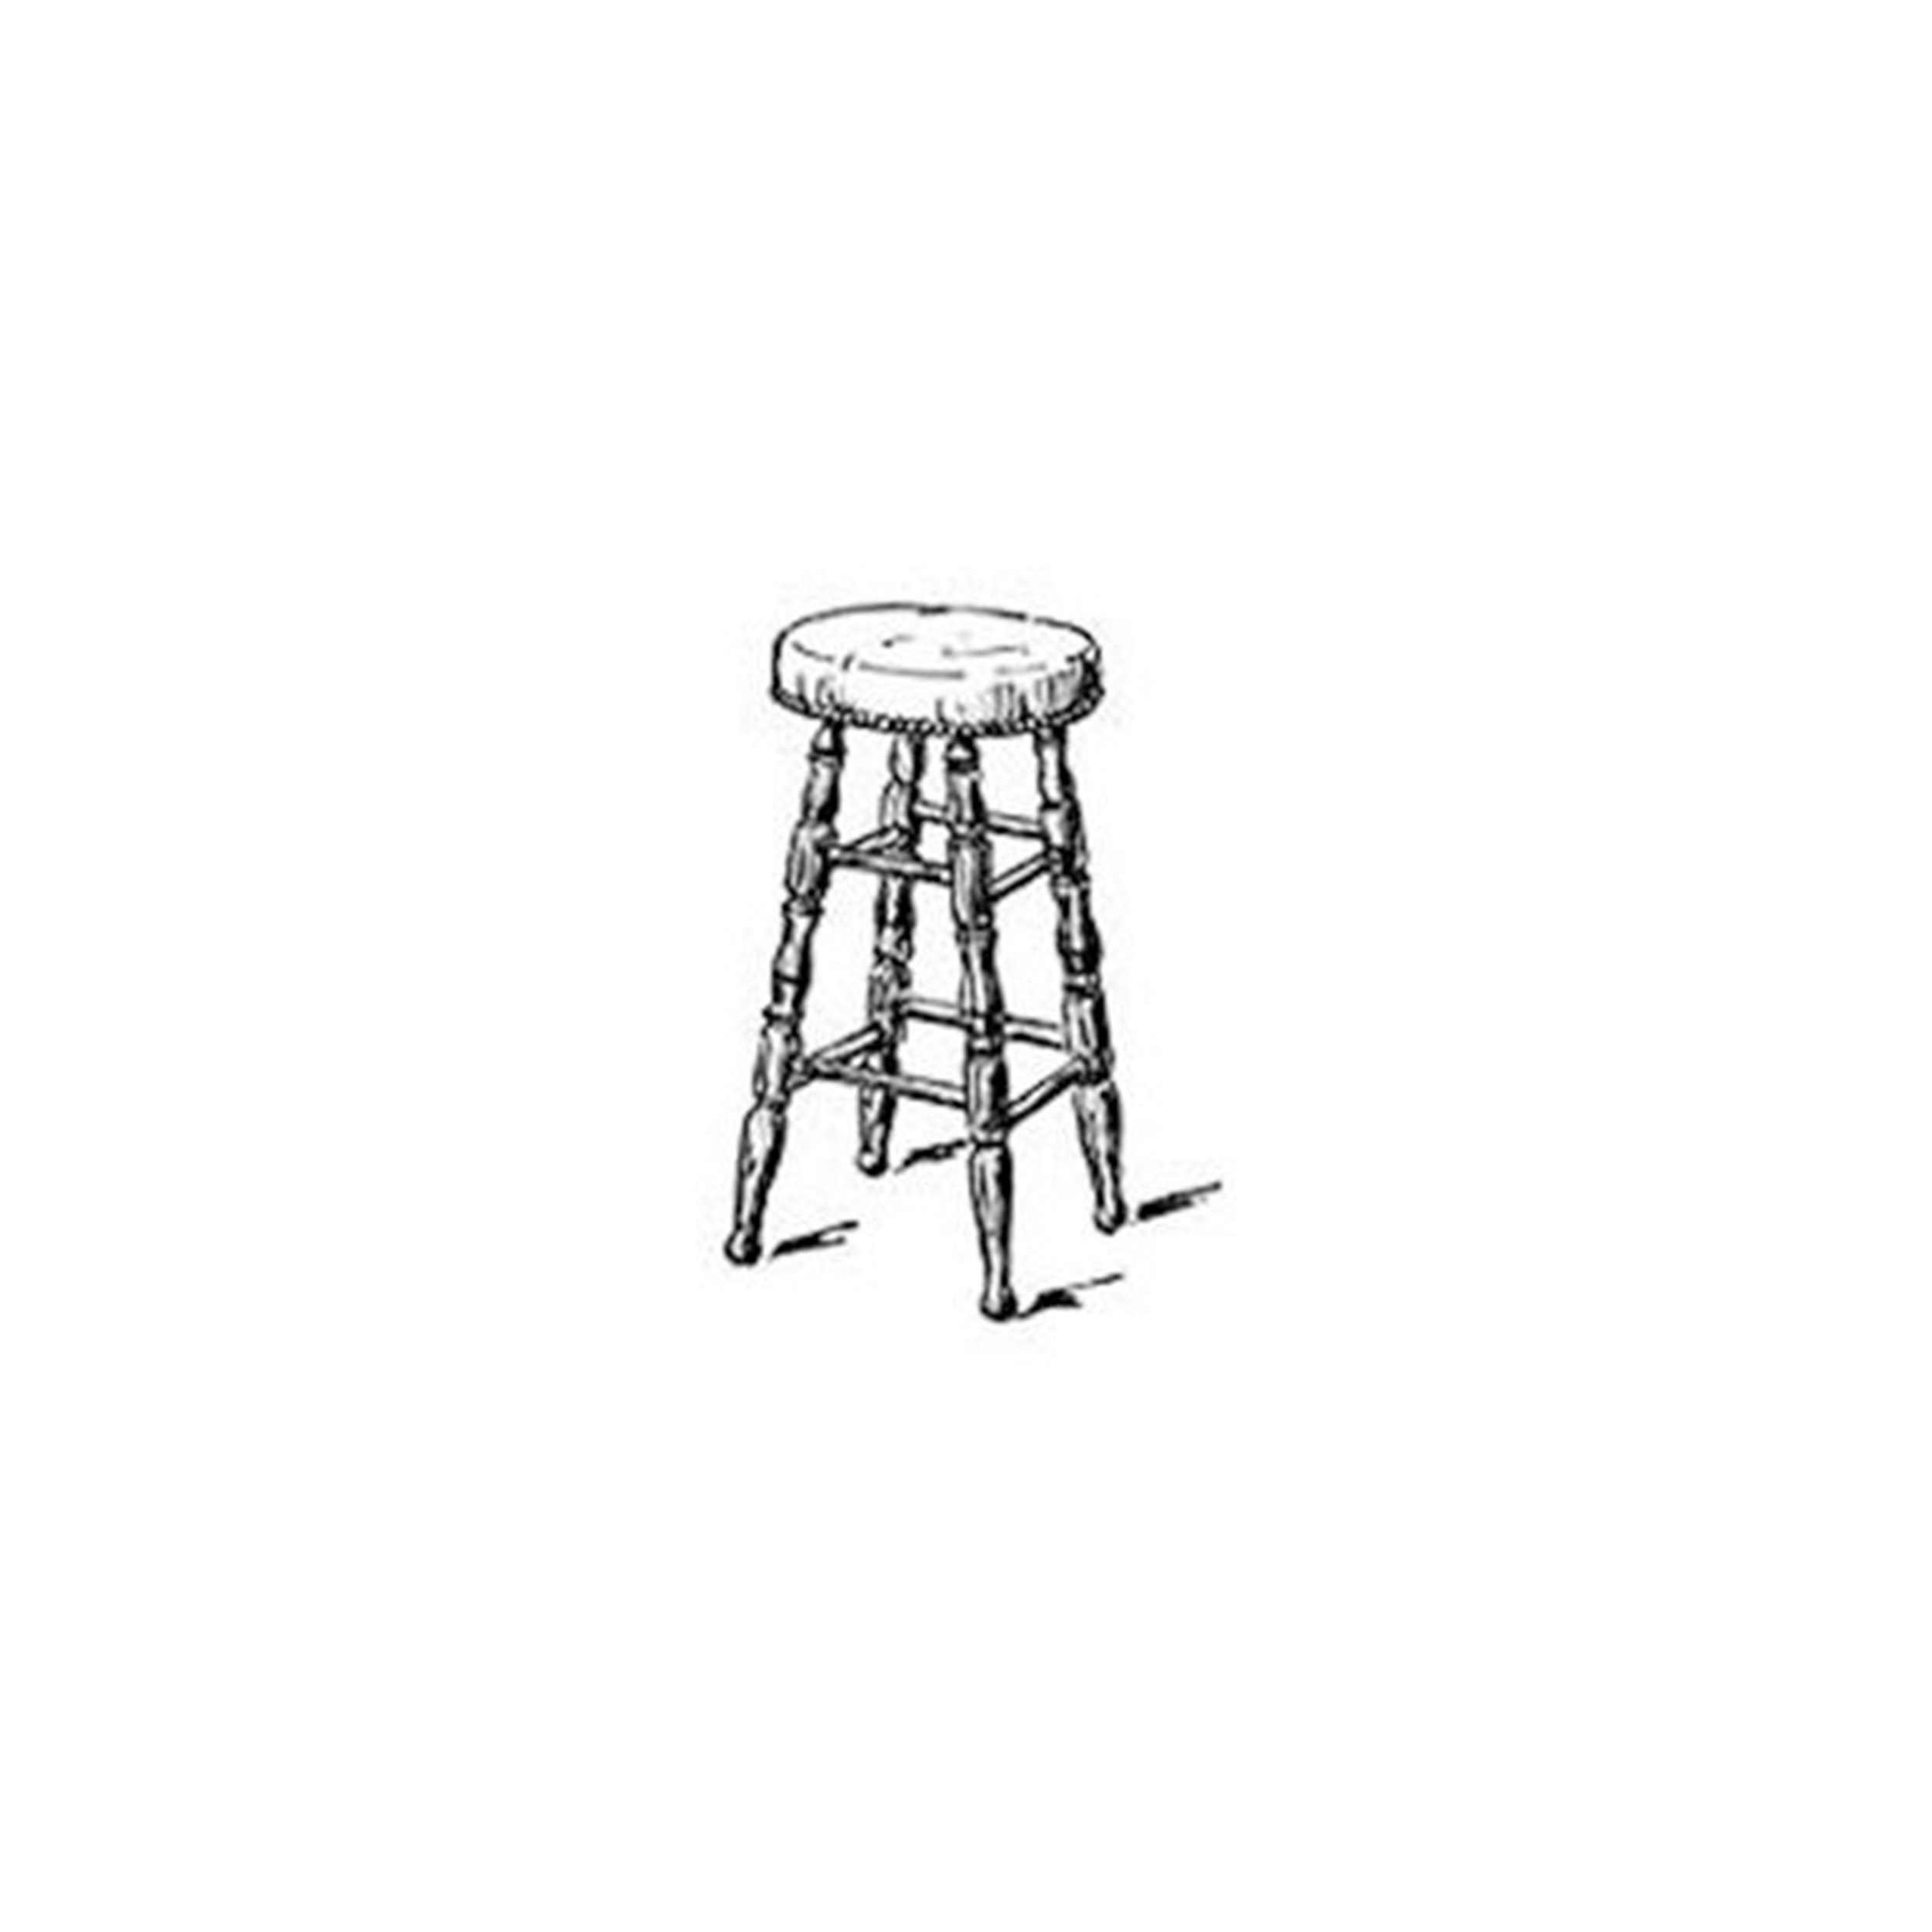 Woodworking Project Paper Plan To Build Bar Stool